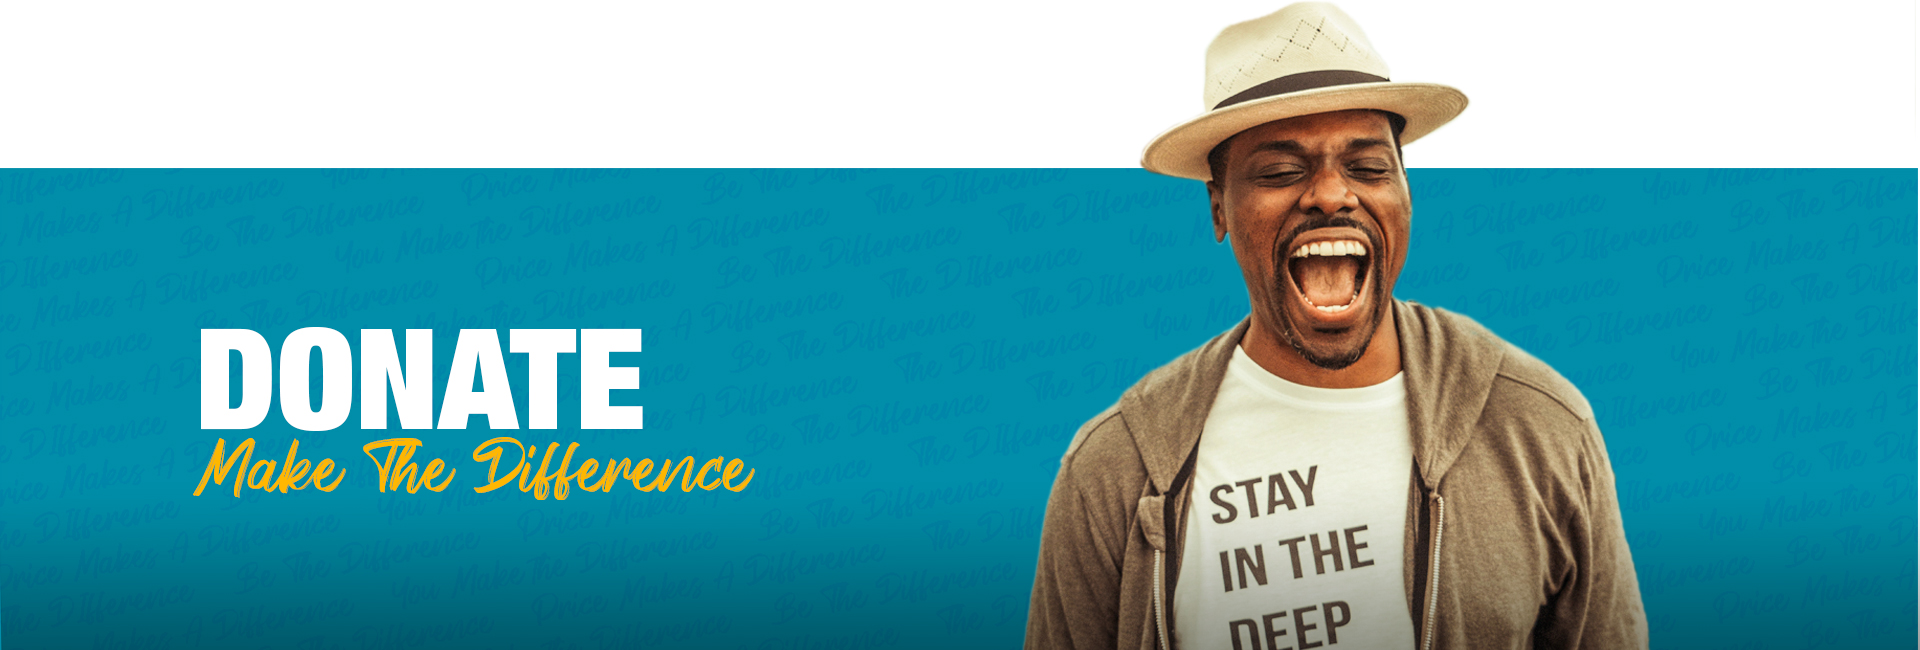 Man wearing a straw hat, a t-shirt that reads "Stay in the deep", and a brown hoodie. Teal background with repetitive text that reads "You make the difference", "Price makes a difference", "Be the difference". Image text reads "Donate" "Make The Difference".